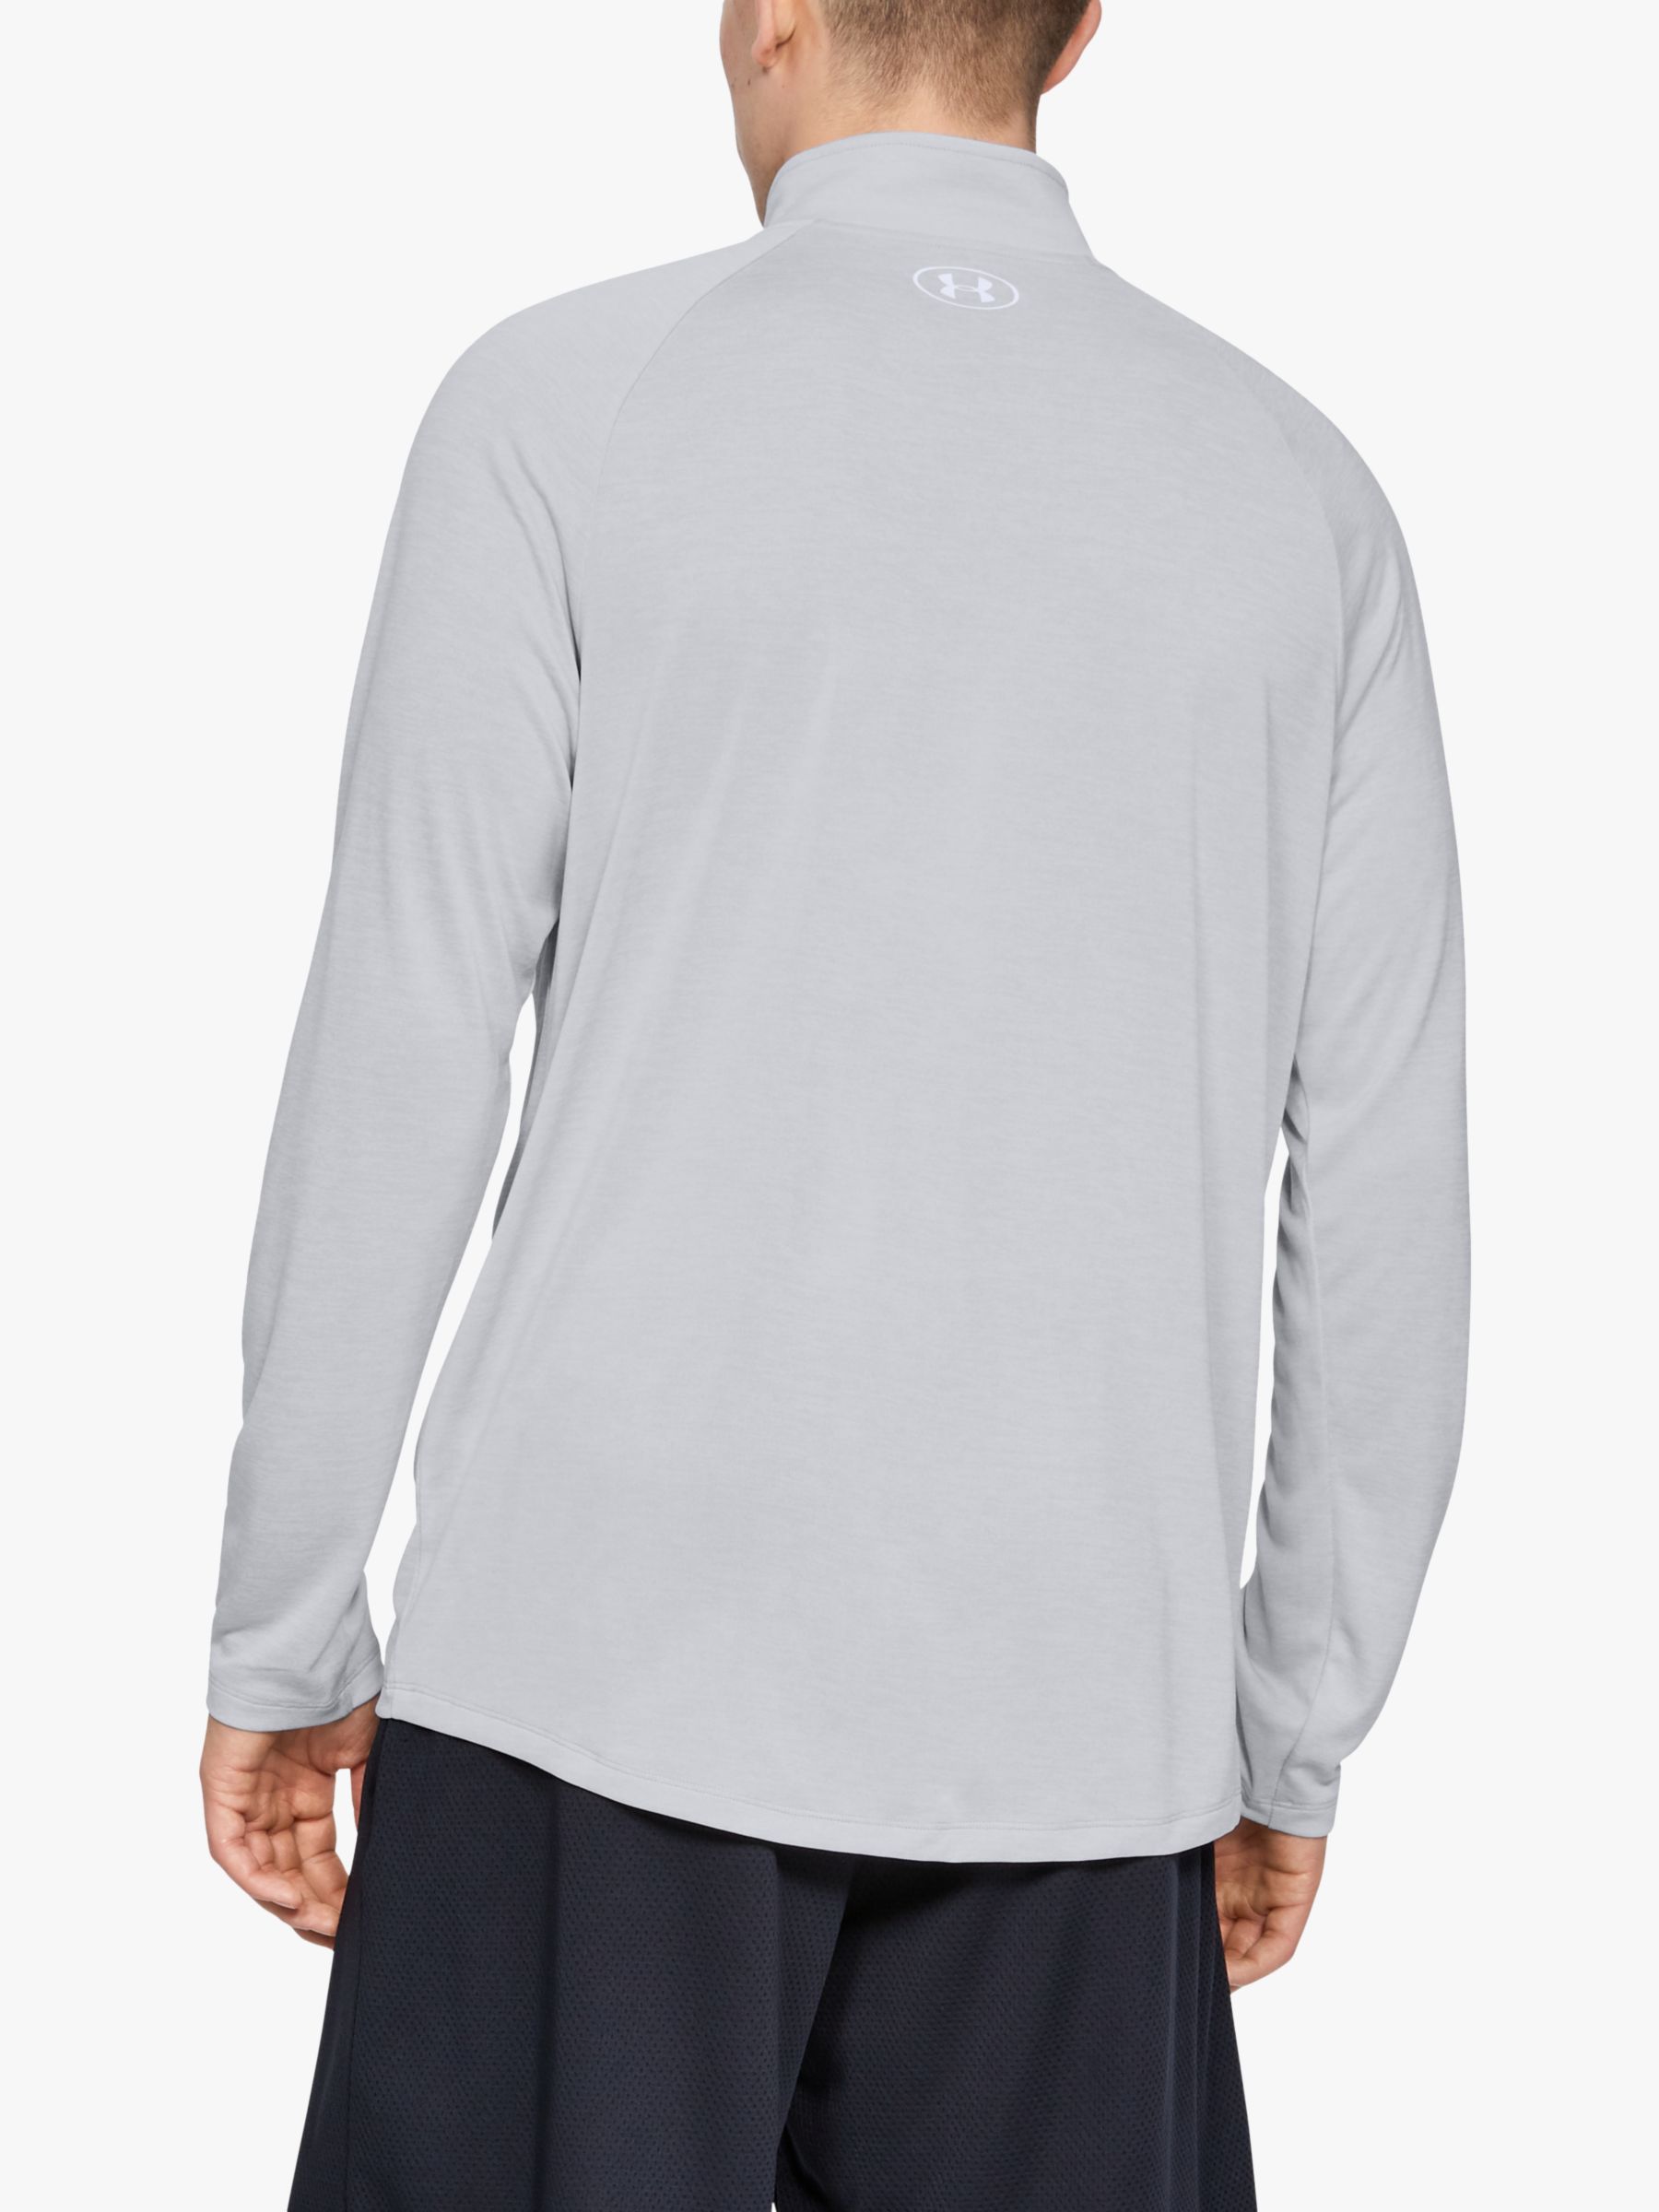 Under Armour Tech 2.0 1/2 Zip Long Sleeve Training Top, Halo Grey at ...